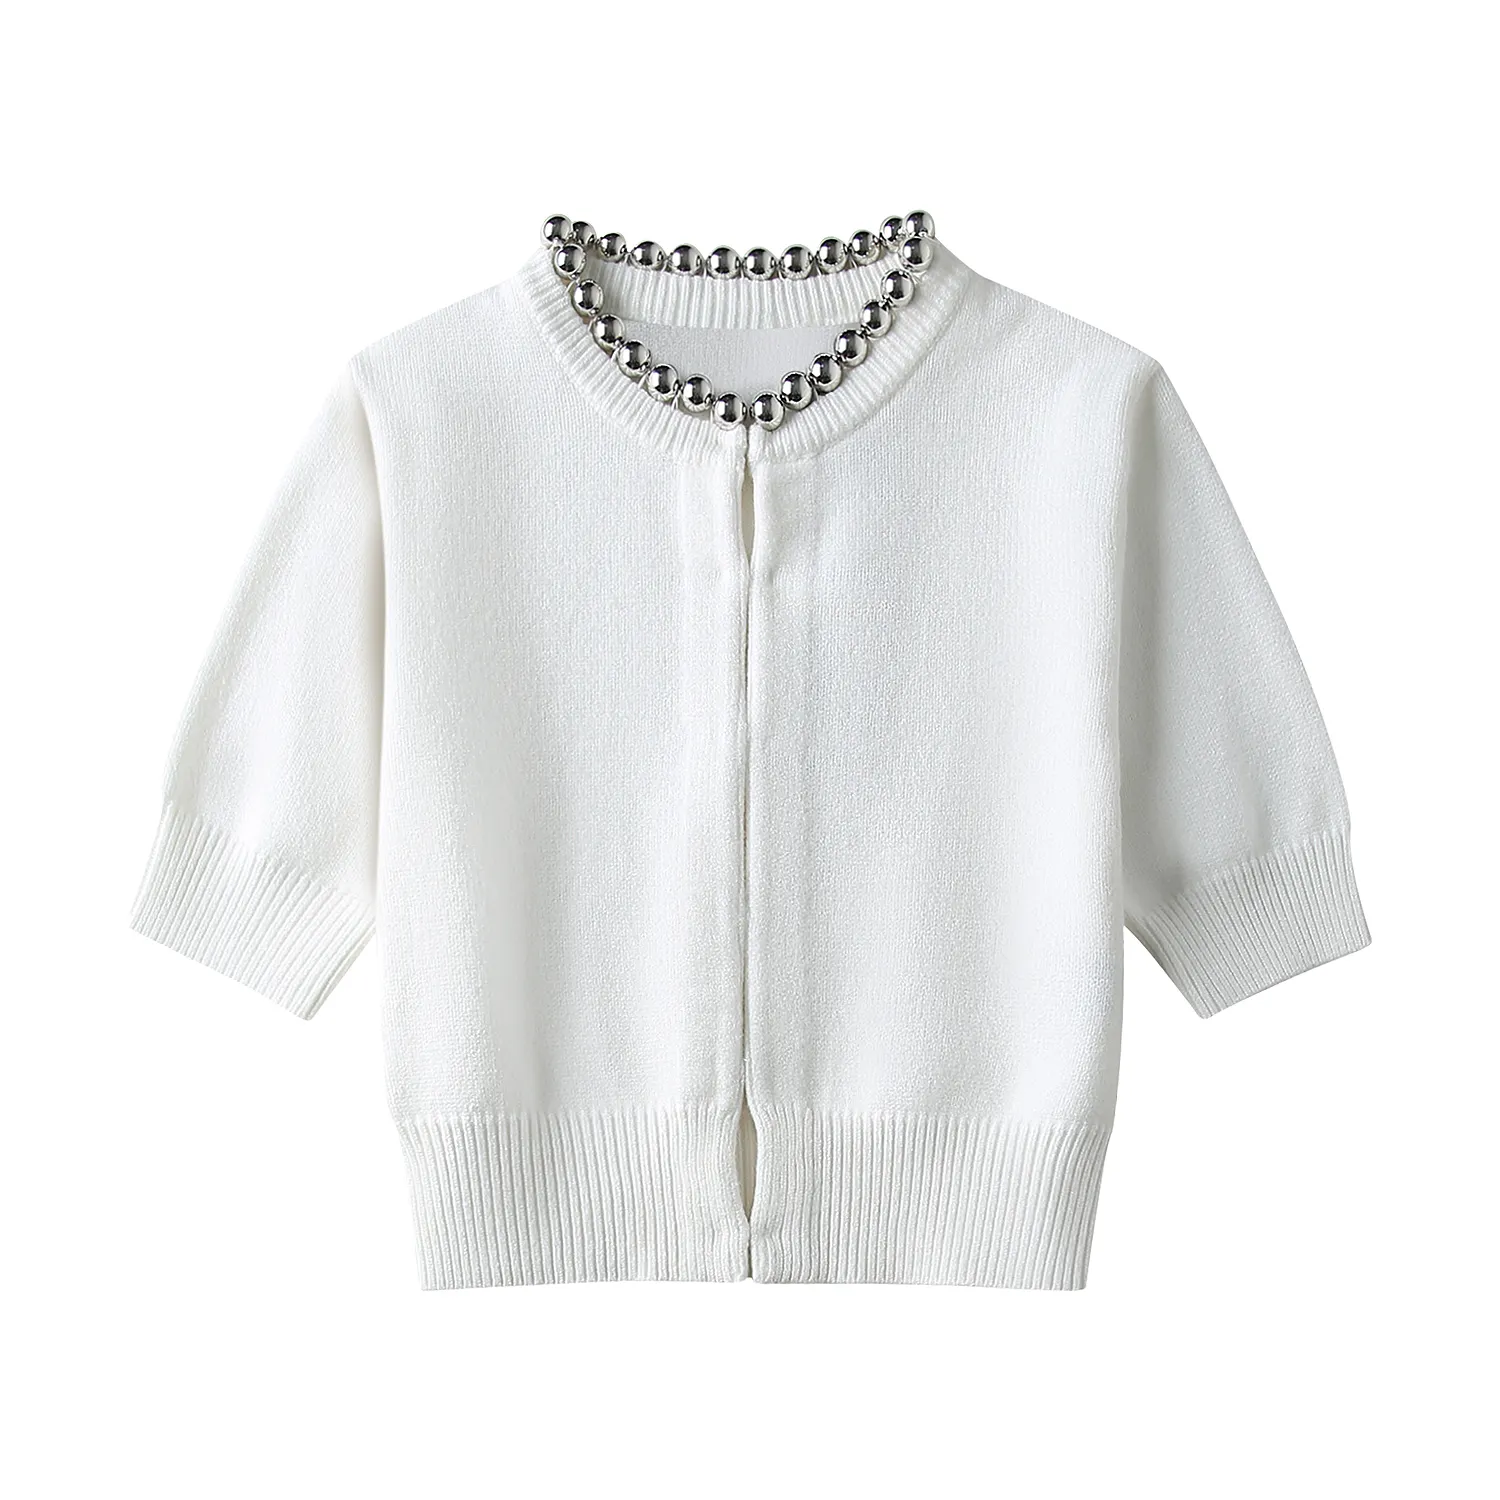 Crew neck short sleeve beading knitted casual fashion cardigan for women